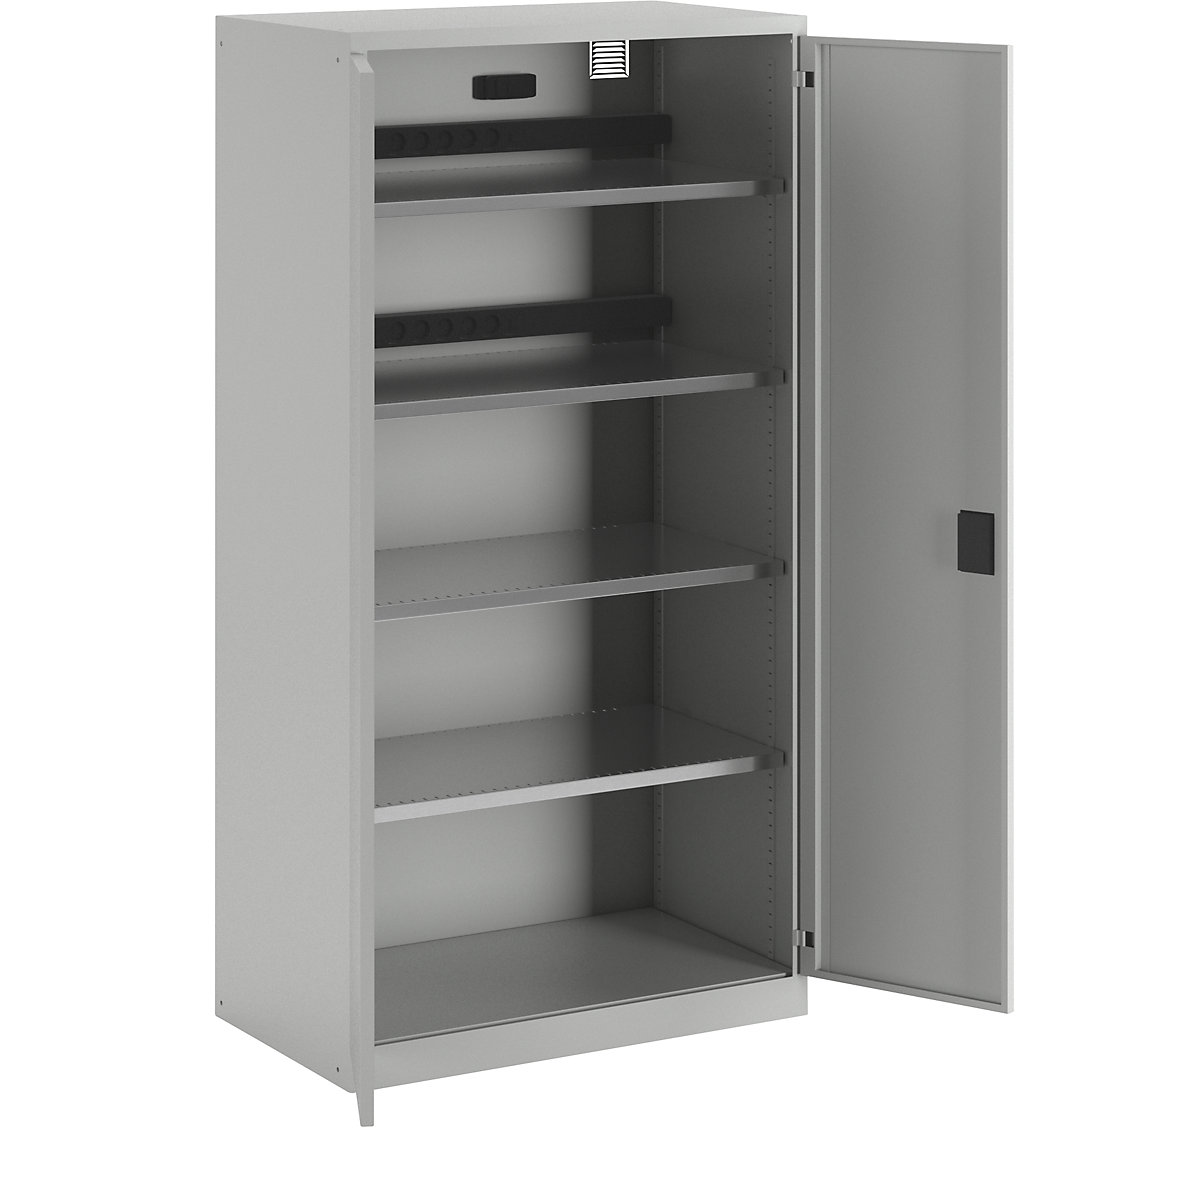 Battery charging cabinet – LISTA, 4 shelves, solid panel doors, 2 power strips at rear with RCD/circuit breaker, grey-12